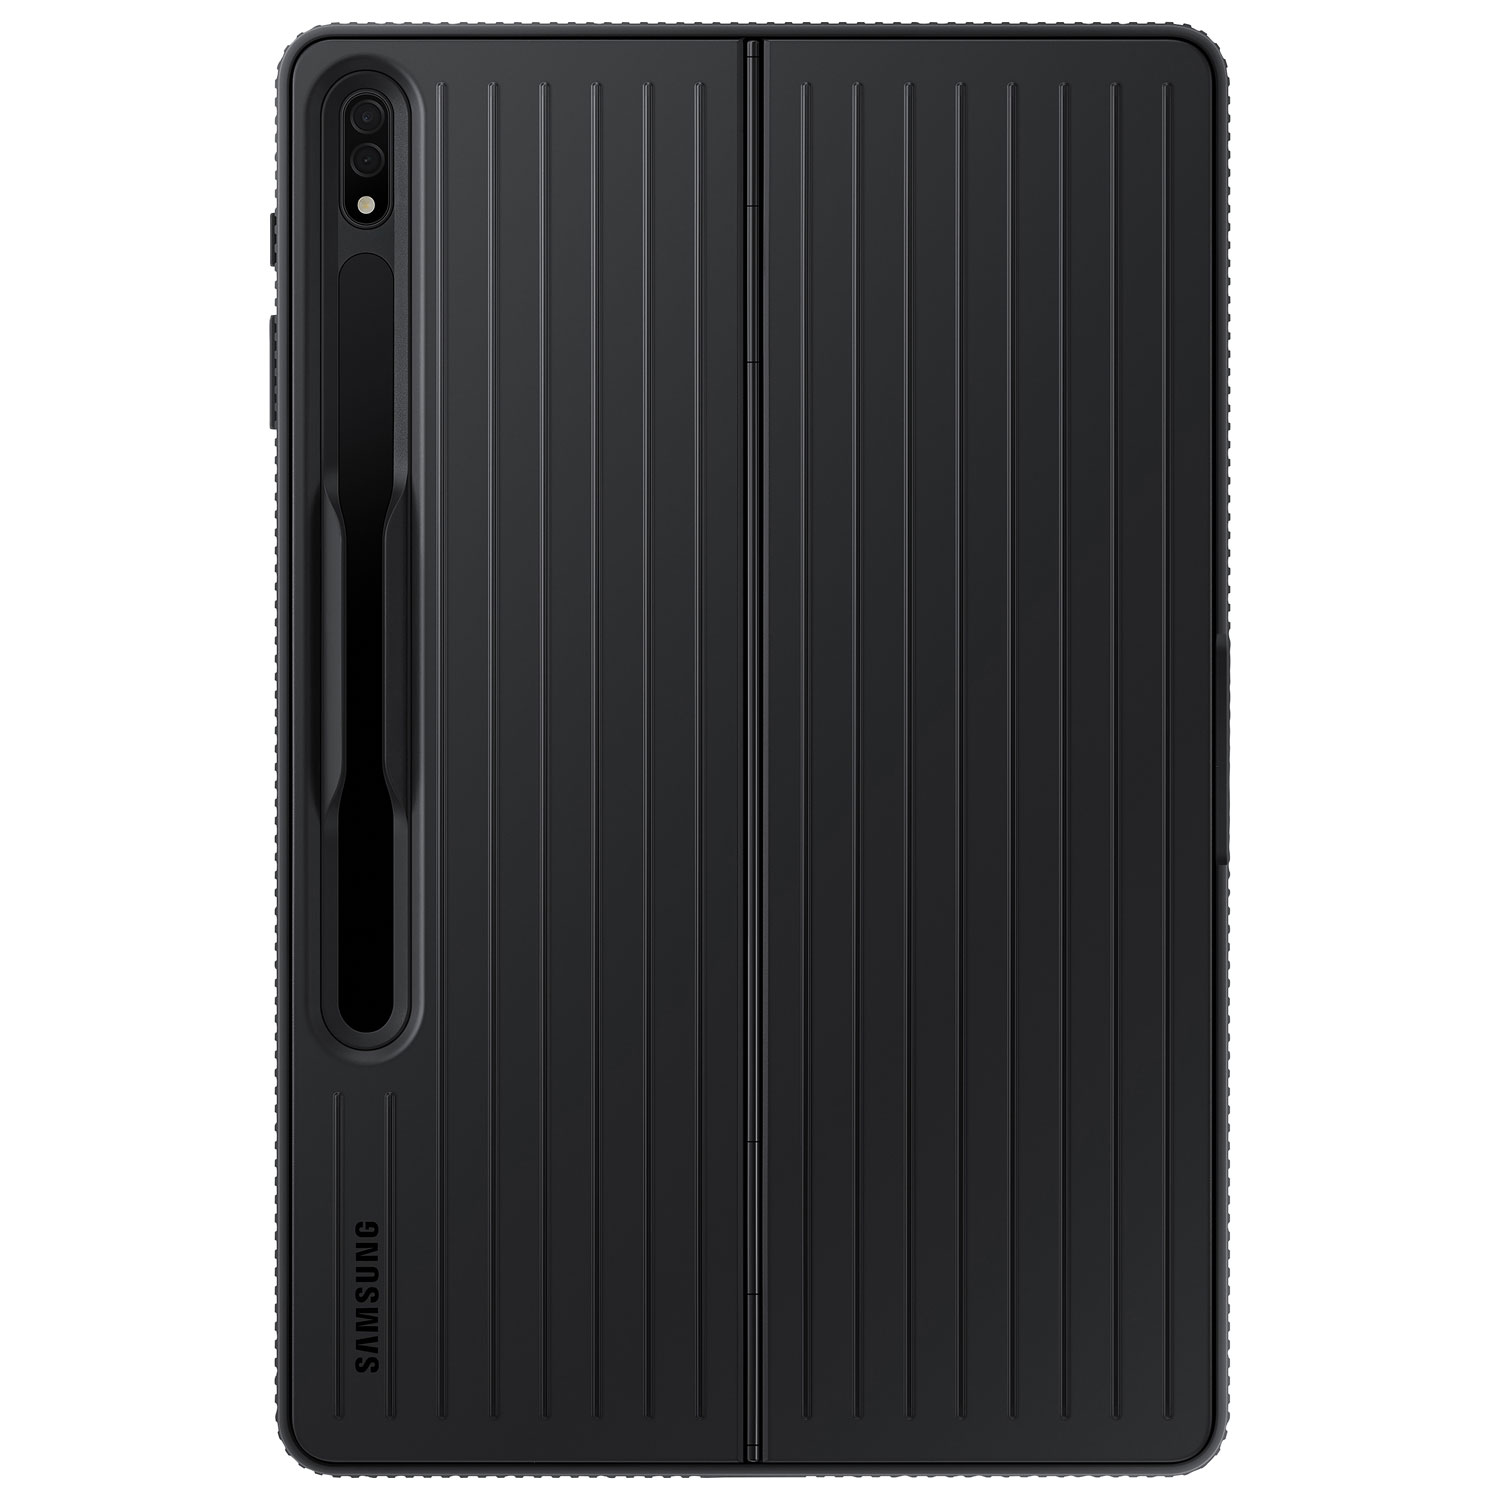 Samsung Protective Cover Case for Galaxy Tab S8+ (Plus) - Black